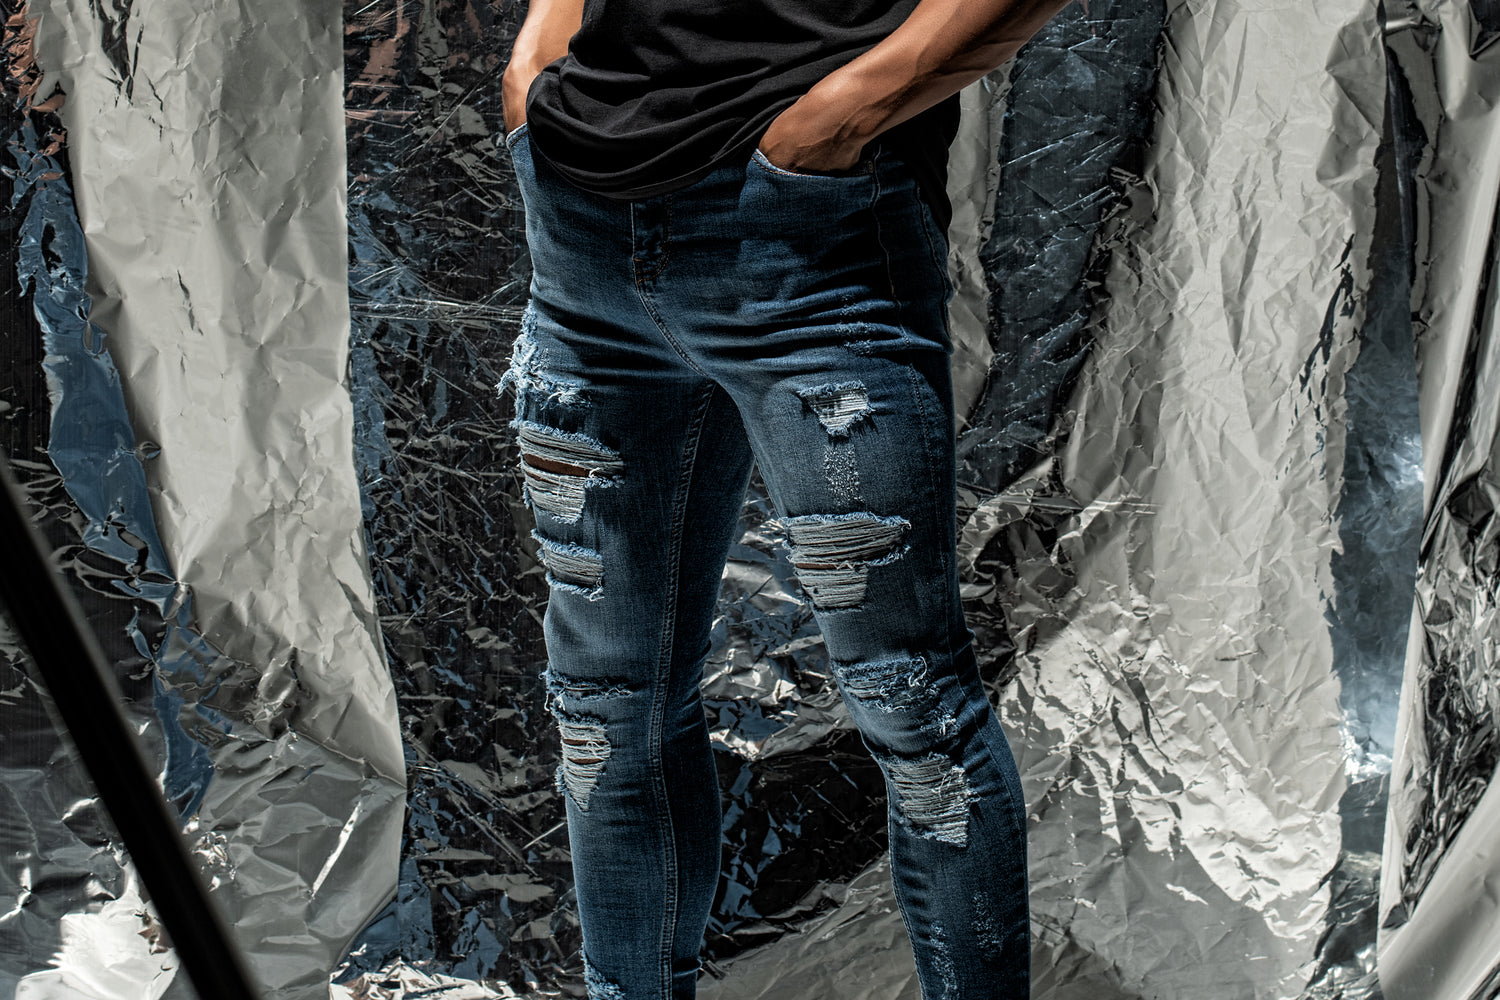 GK What | Jeans Between Are Differences Distressed and Ripped